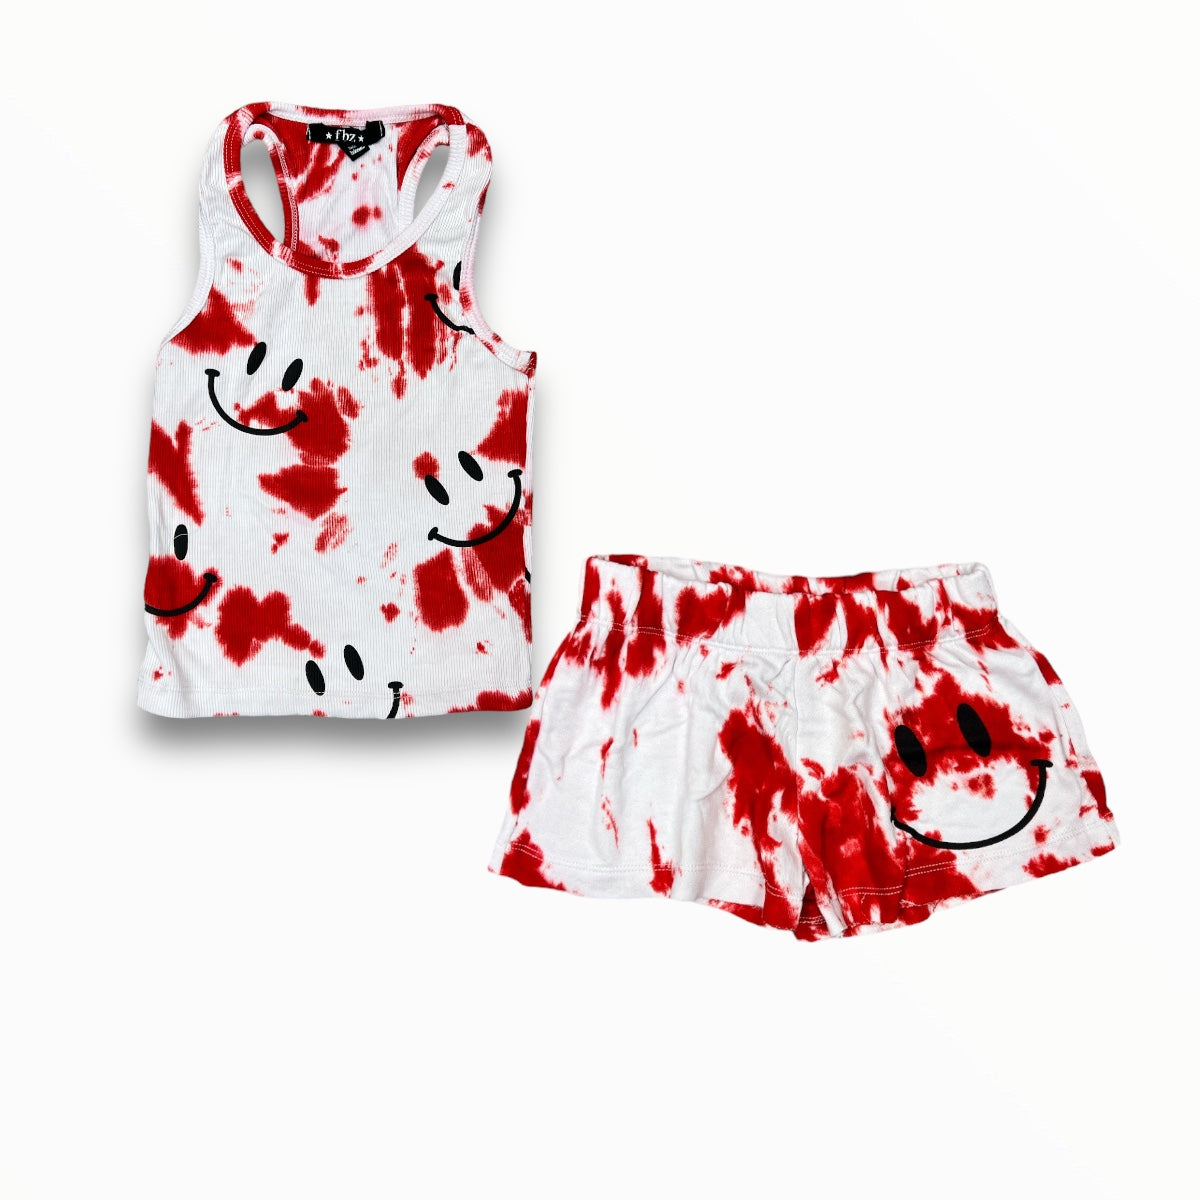 FLOWERS BY ZOE RIBBED TANK - RED TIE DYE - SMILEY